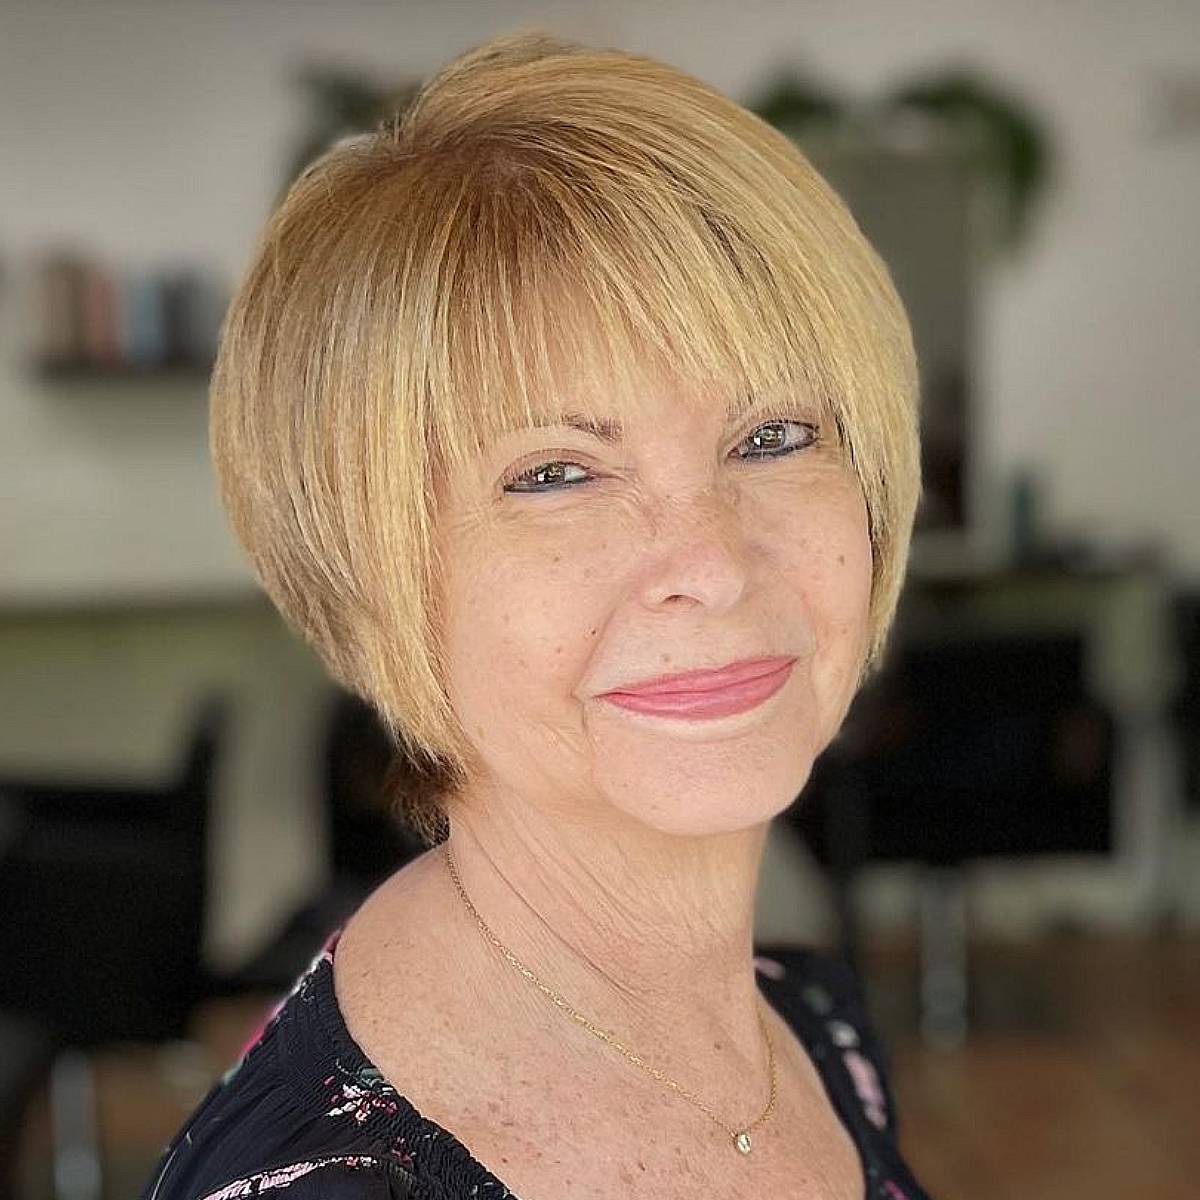 Shag Haircuts for Women Over 50: Wow in the Textured Style | First For Women